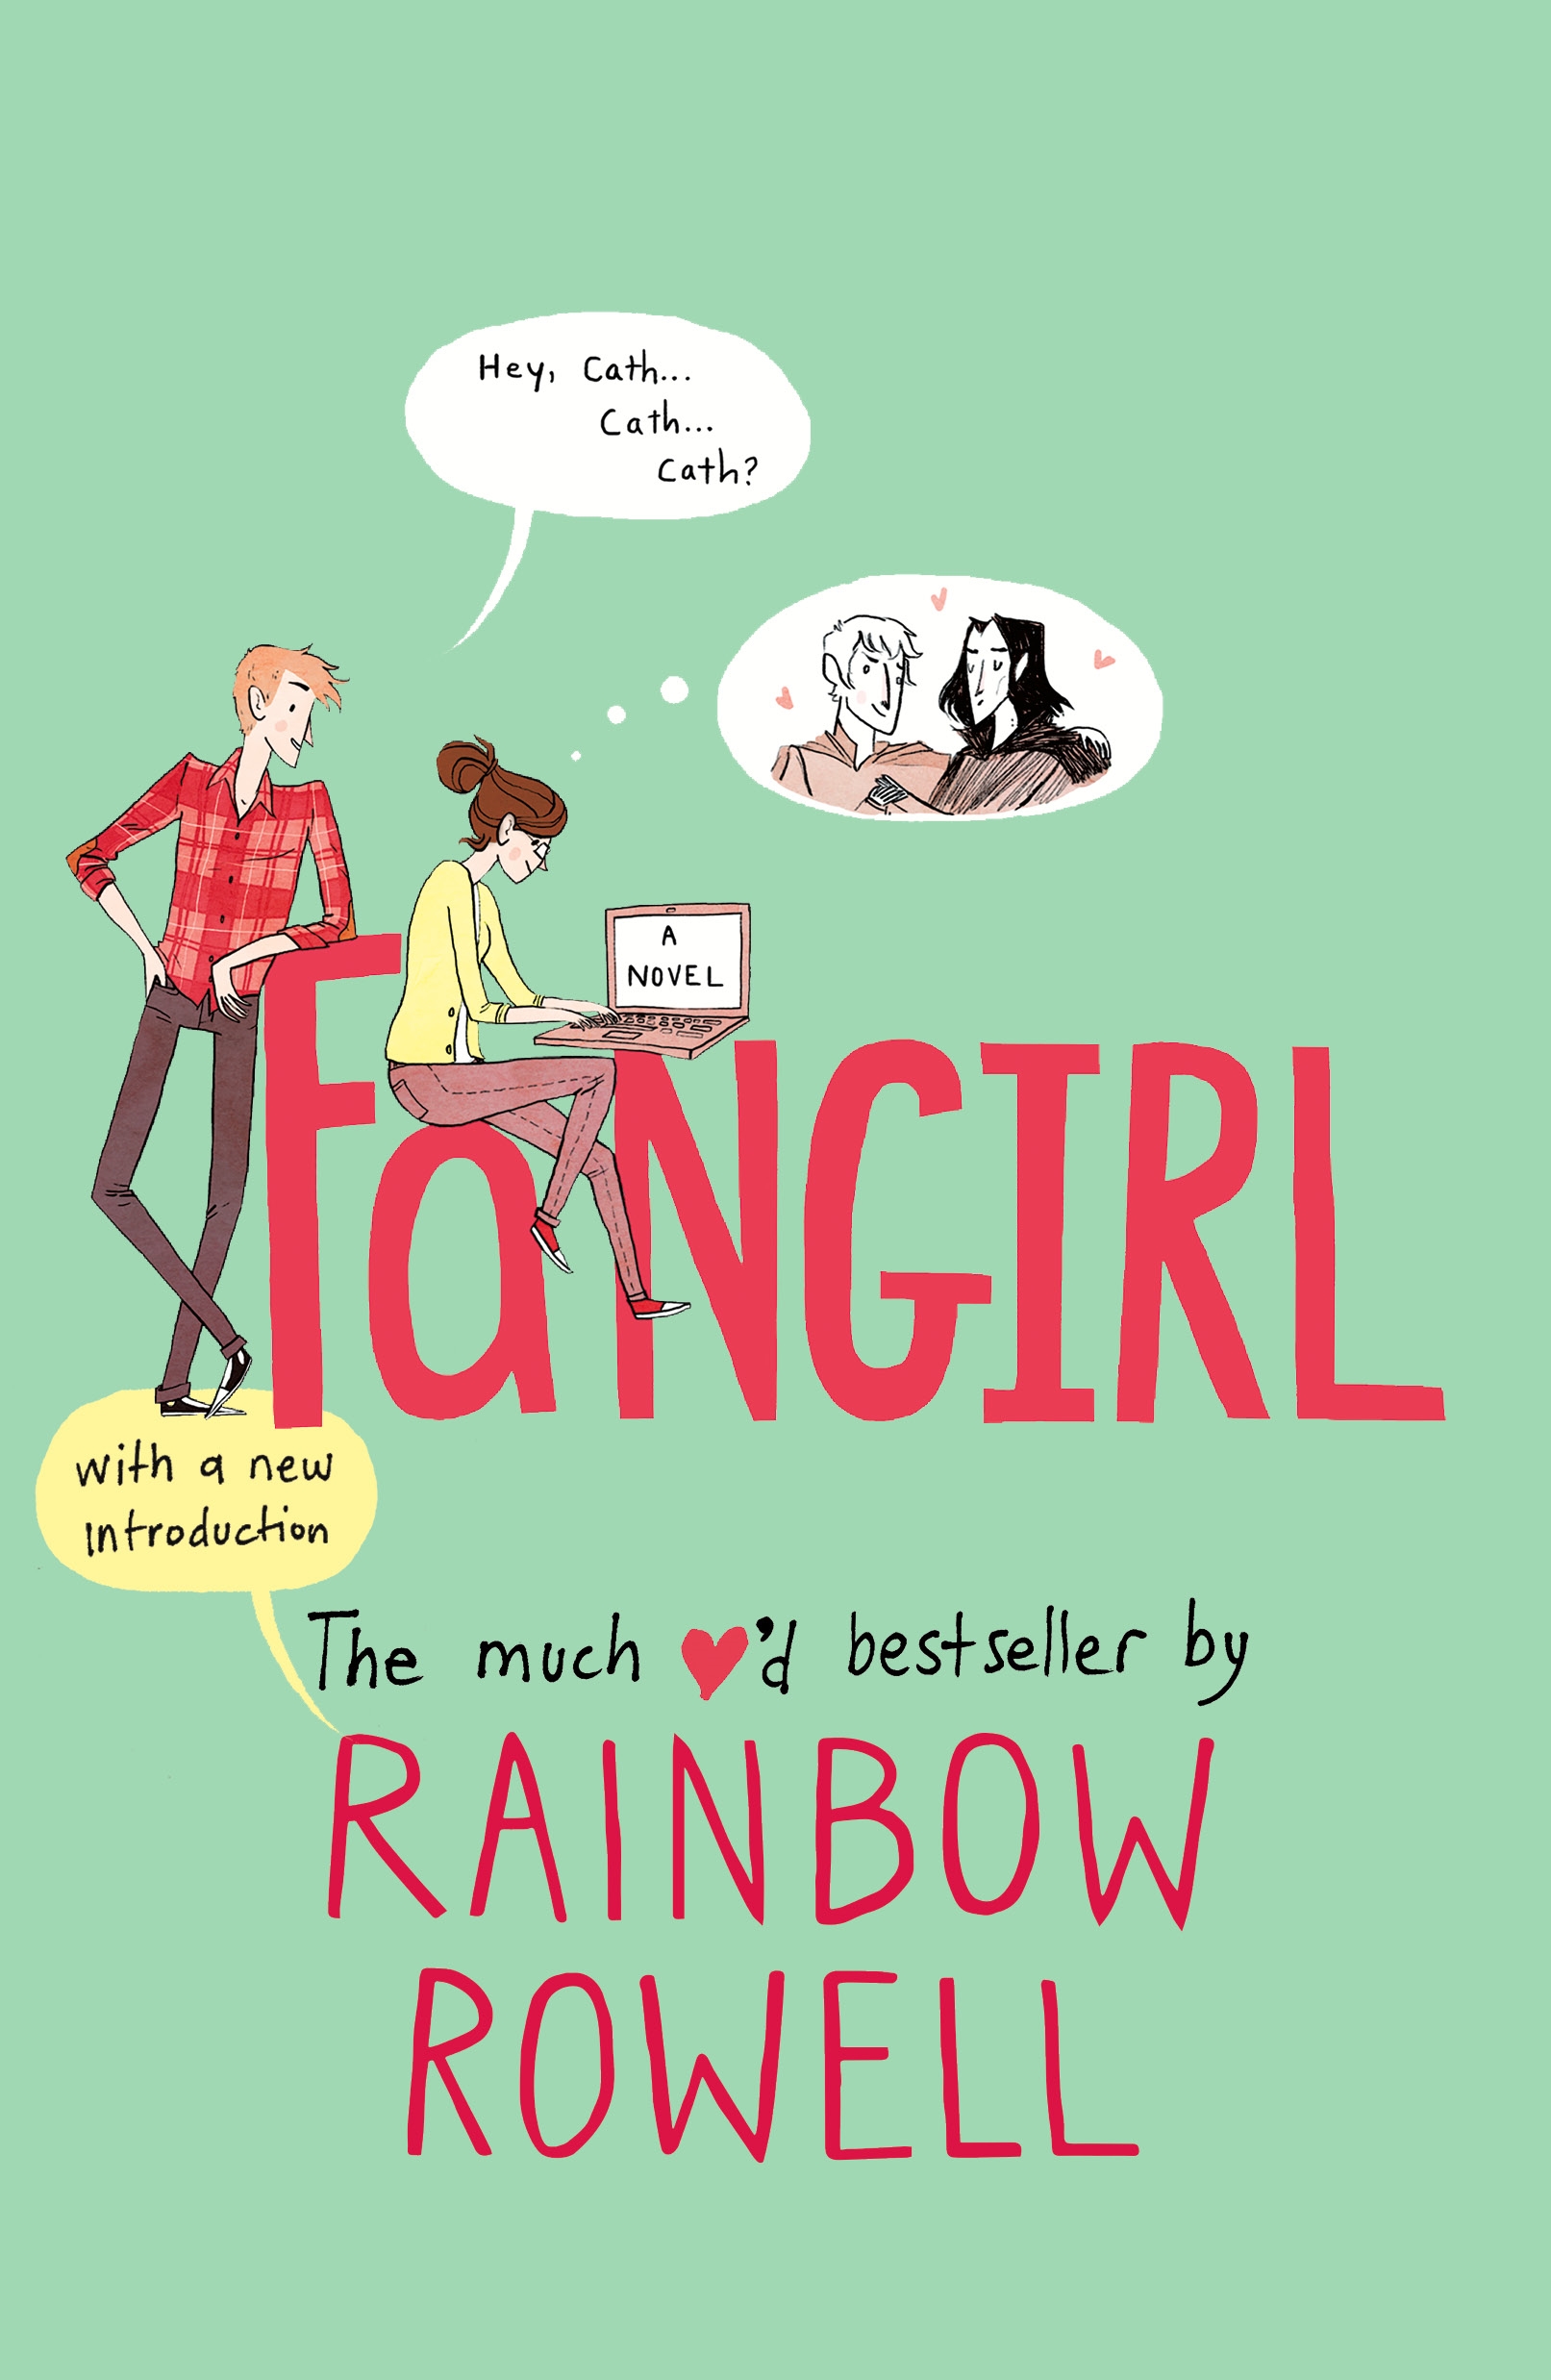 Book “Fangirl” by Rainbow Rowell — November 6, 2018